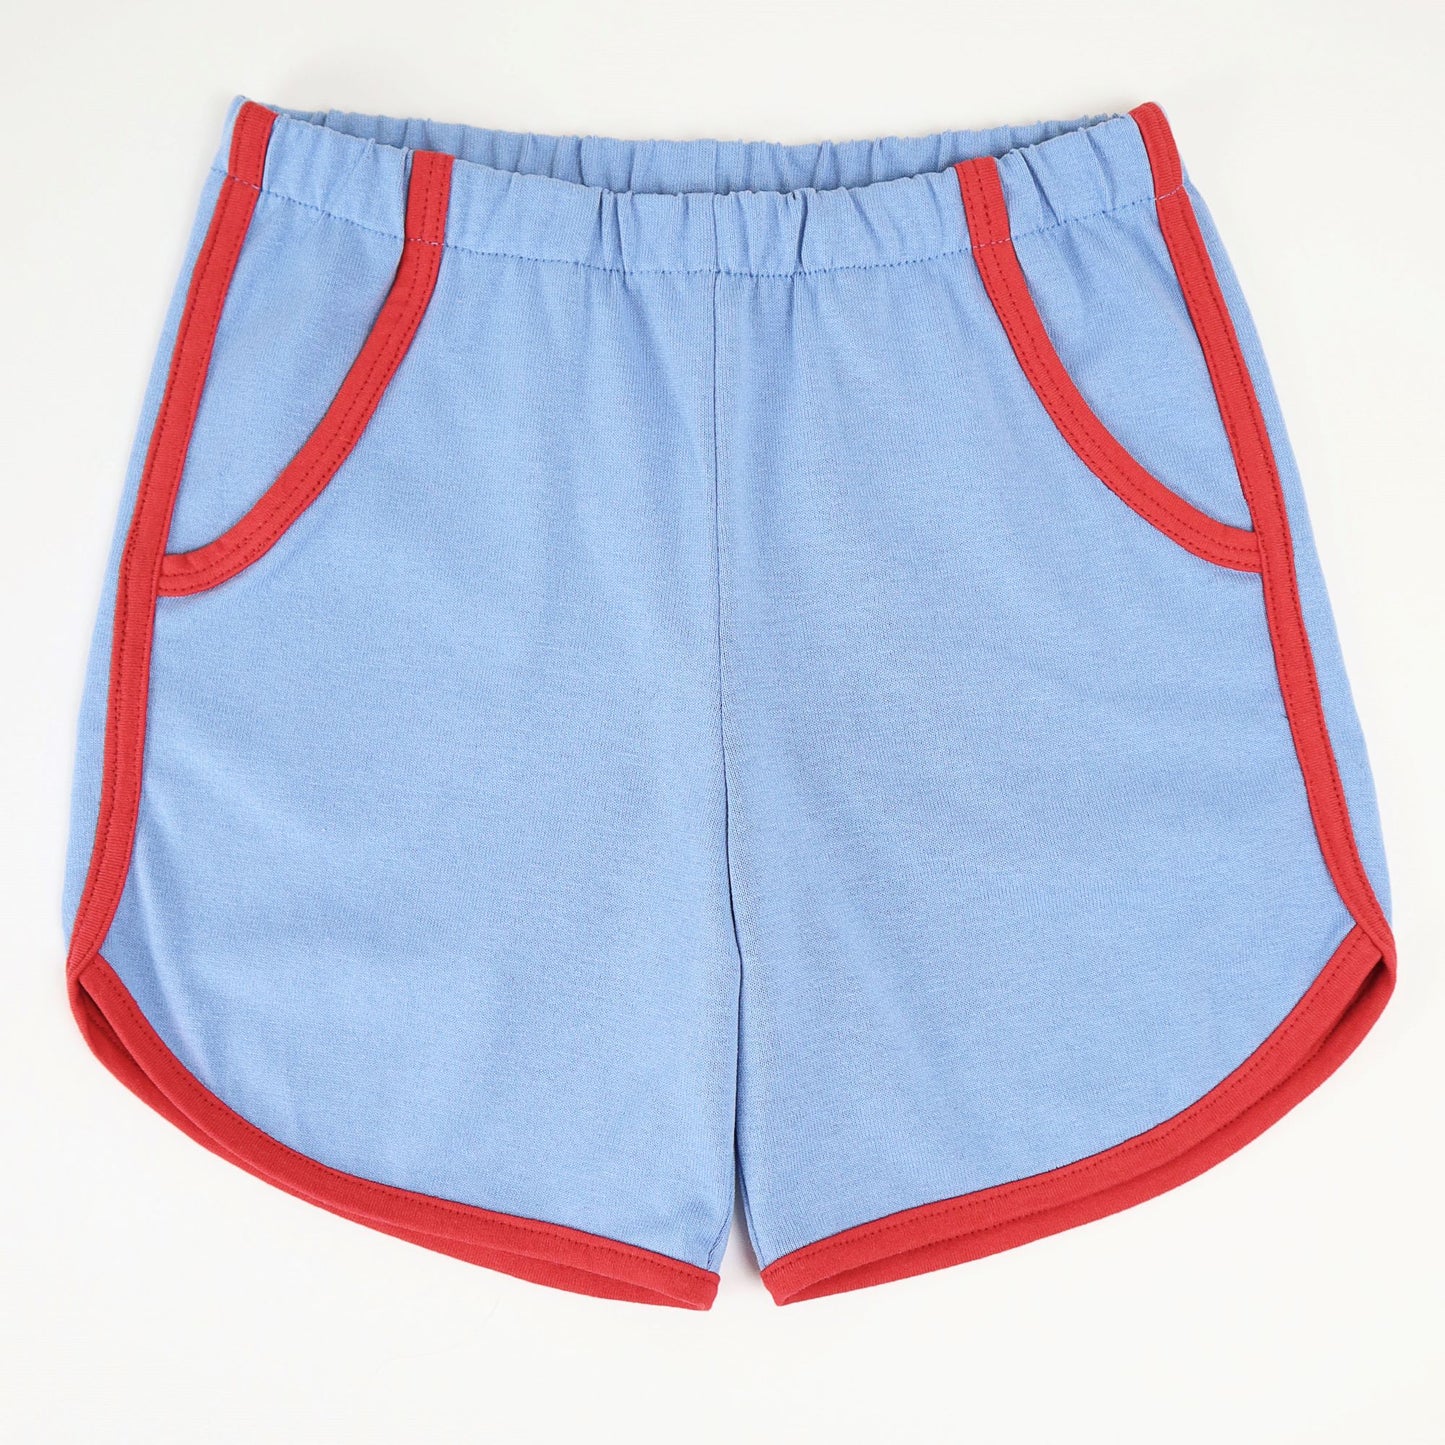 The Play Fort Shorts